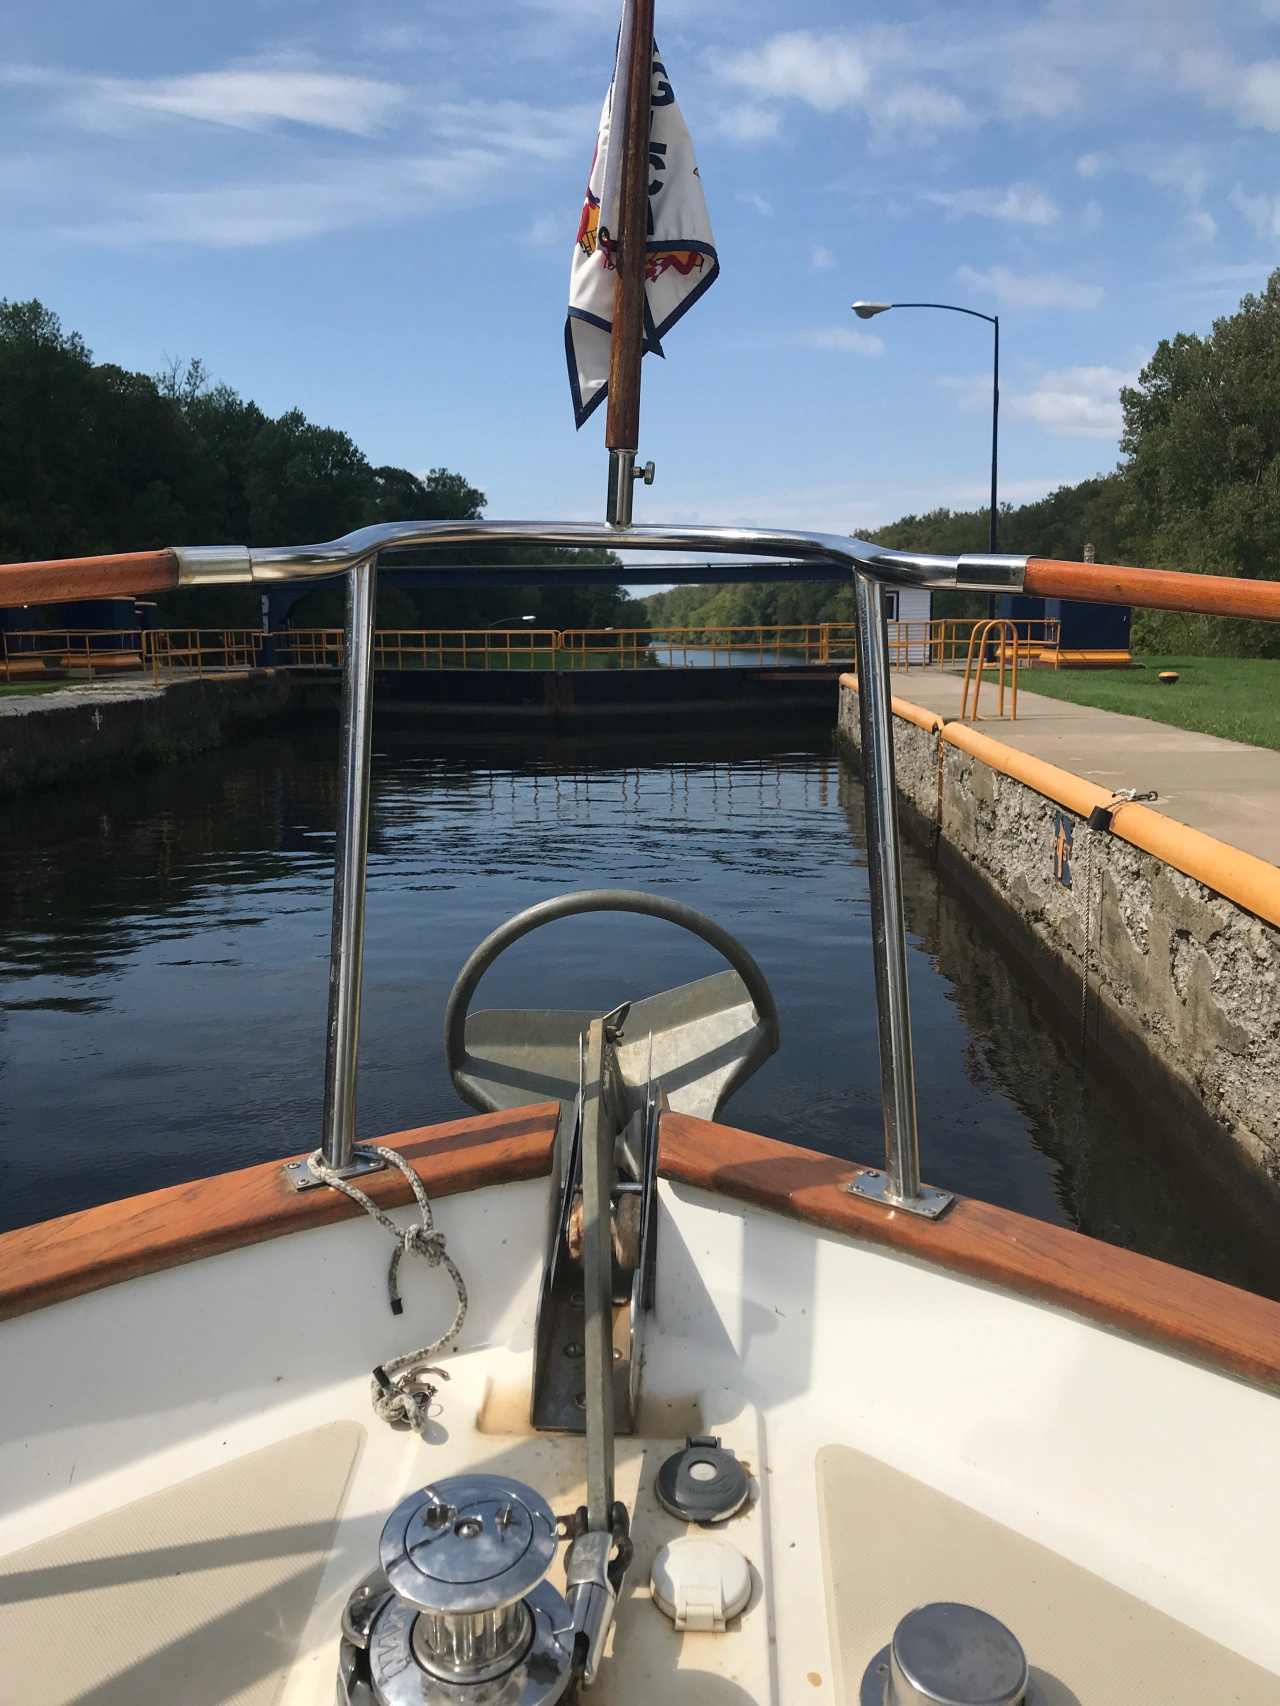 2019 Finale: Revisiting the Erie Canal in September